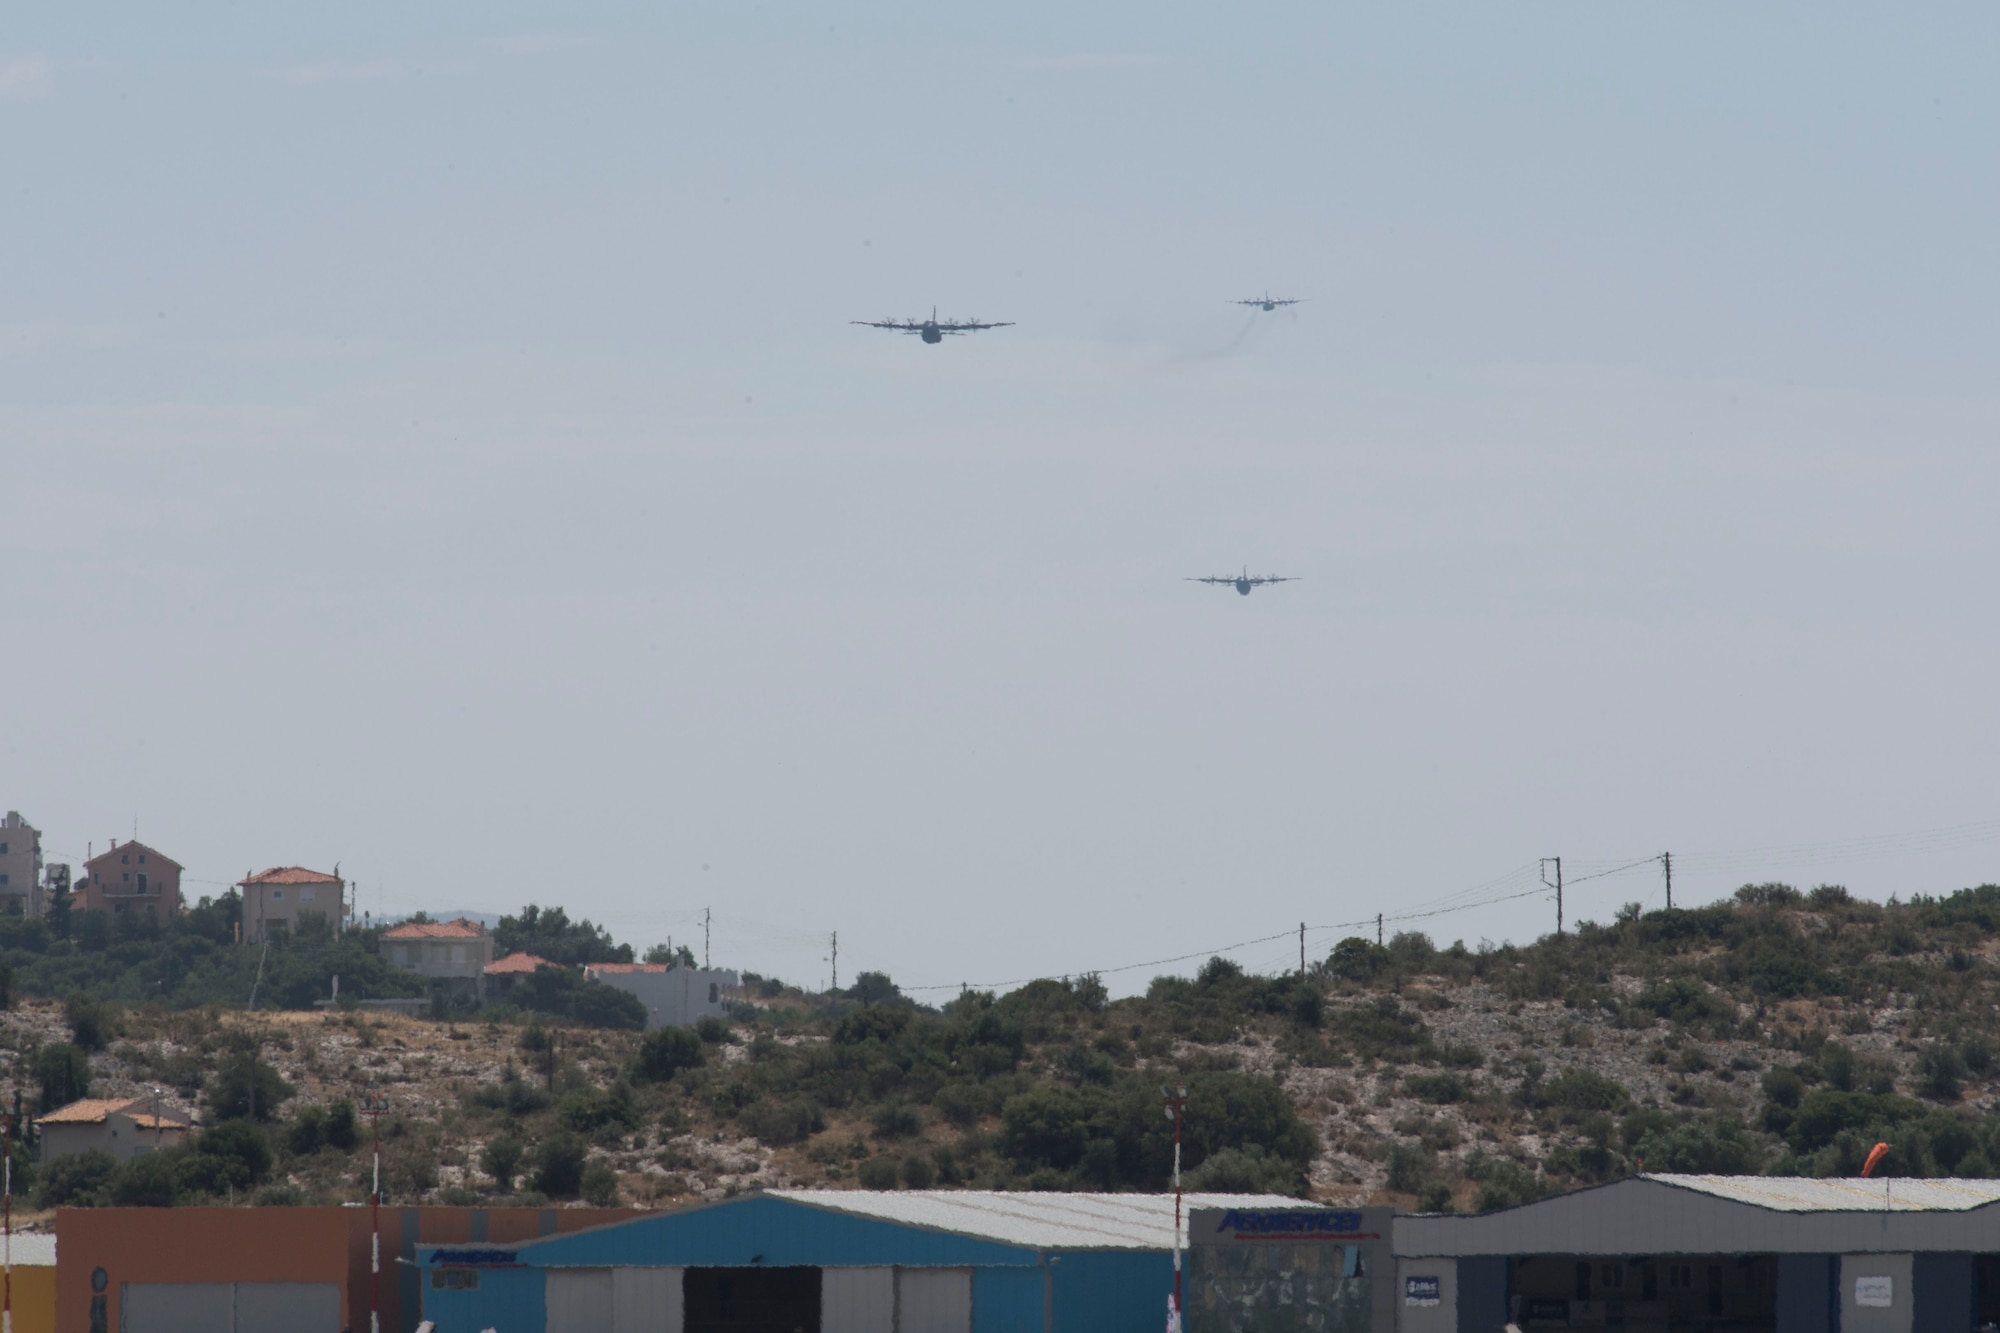 Two U.S. Air Force C-130J Super Hercules fly in formation in front of a Hellenic Air Force C-130H Hercules during the final training flight for Stolen Cerberus V, over Megara Drop Zone, Greece, May 15, 2018. Combined interfly missions such as these, enhance the interoperability capabilities and kills among allied and partner armed forces. (U.S. Air Force photo by Senior Airman Devin M. Rumbaugh)